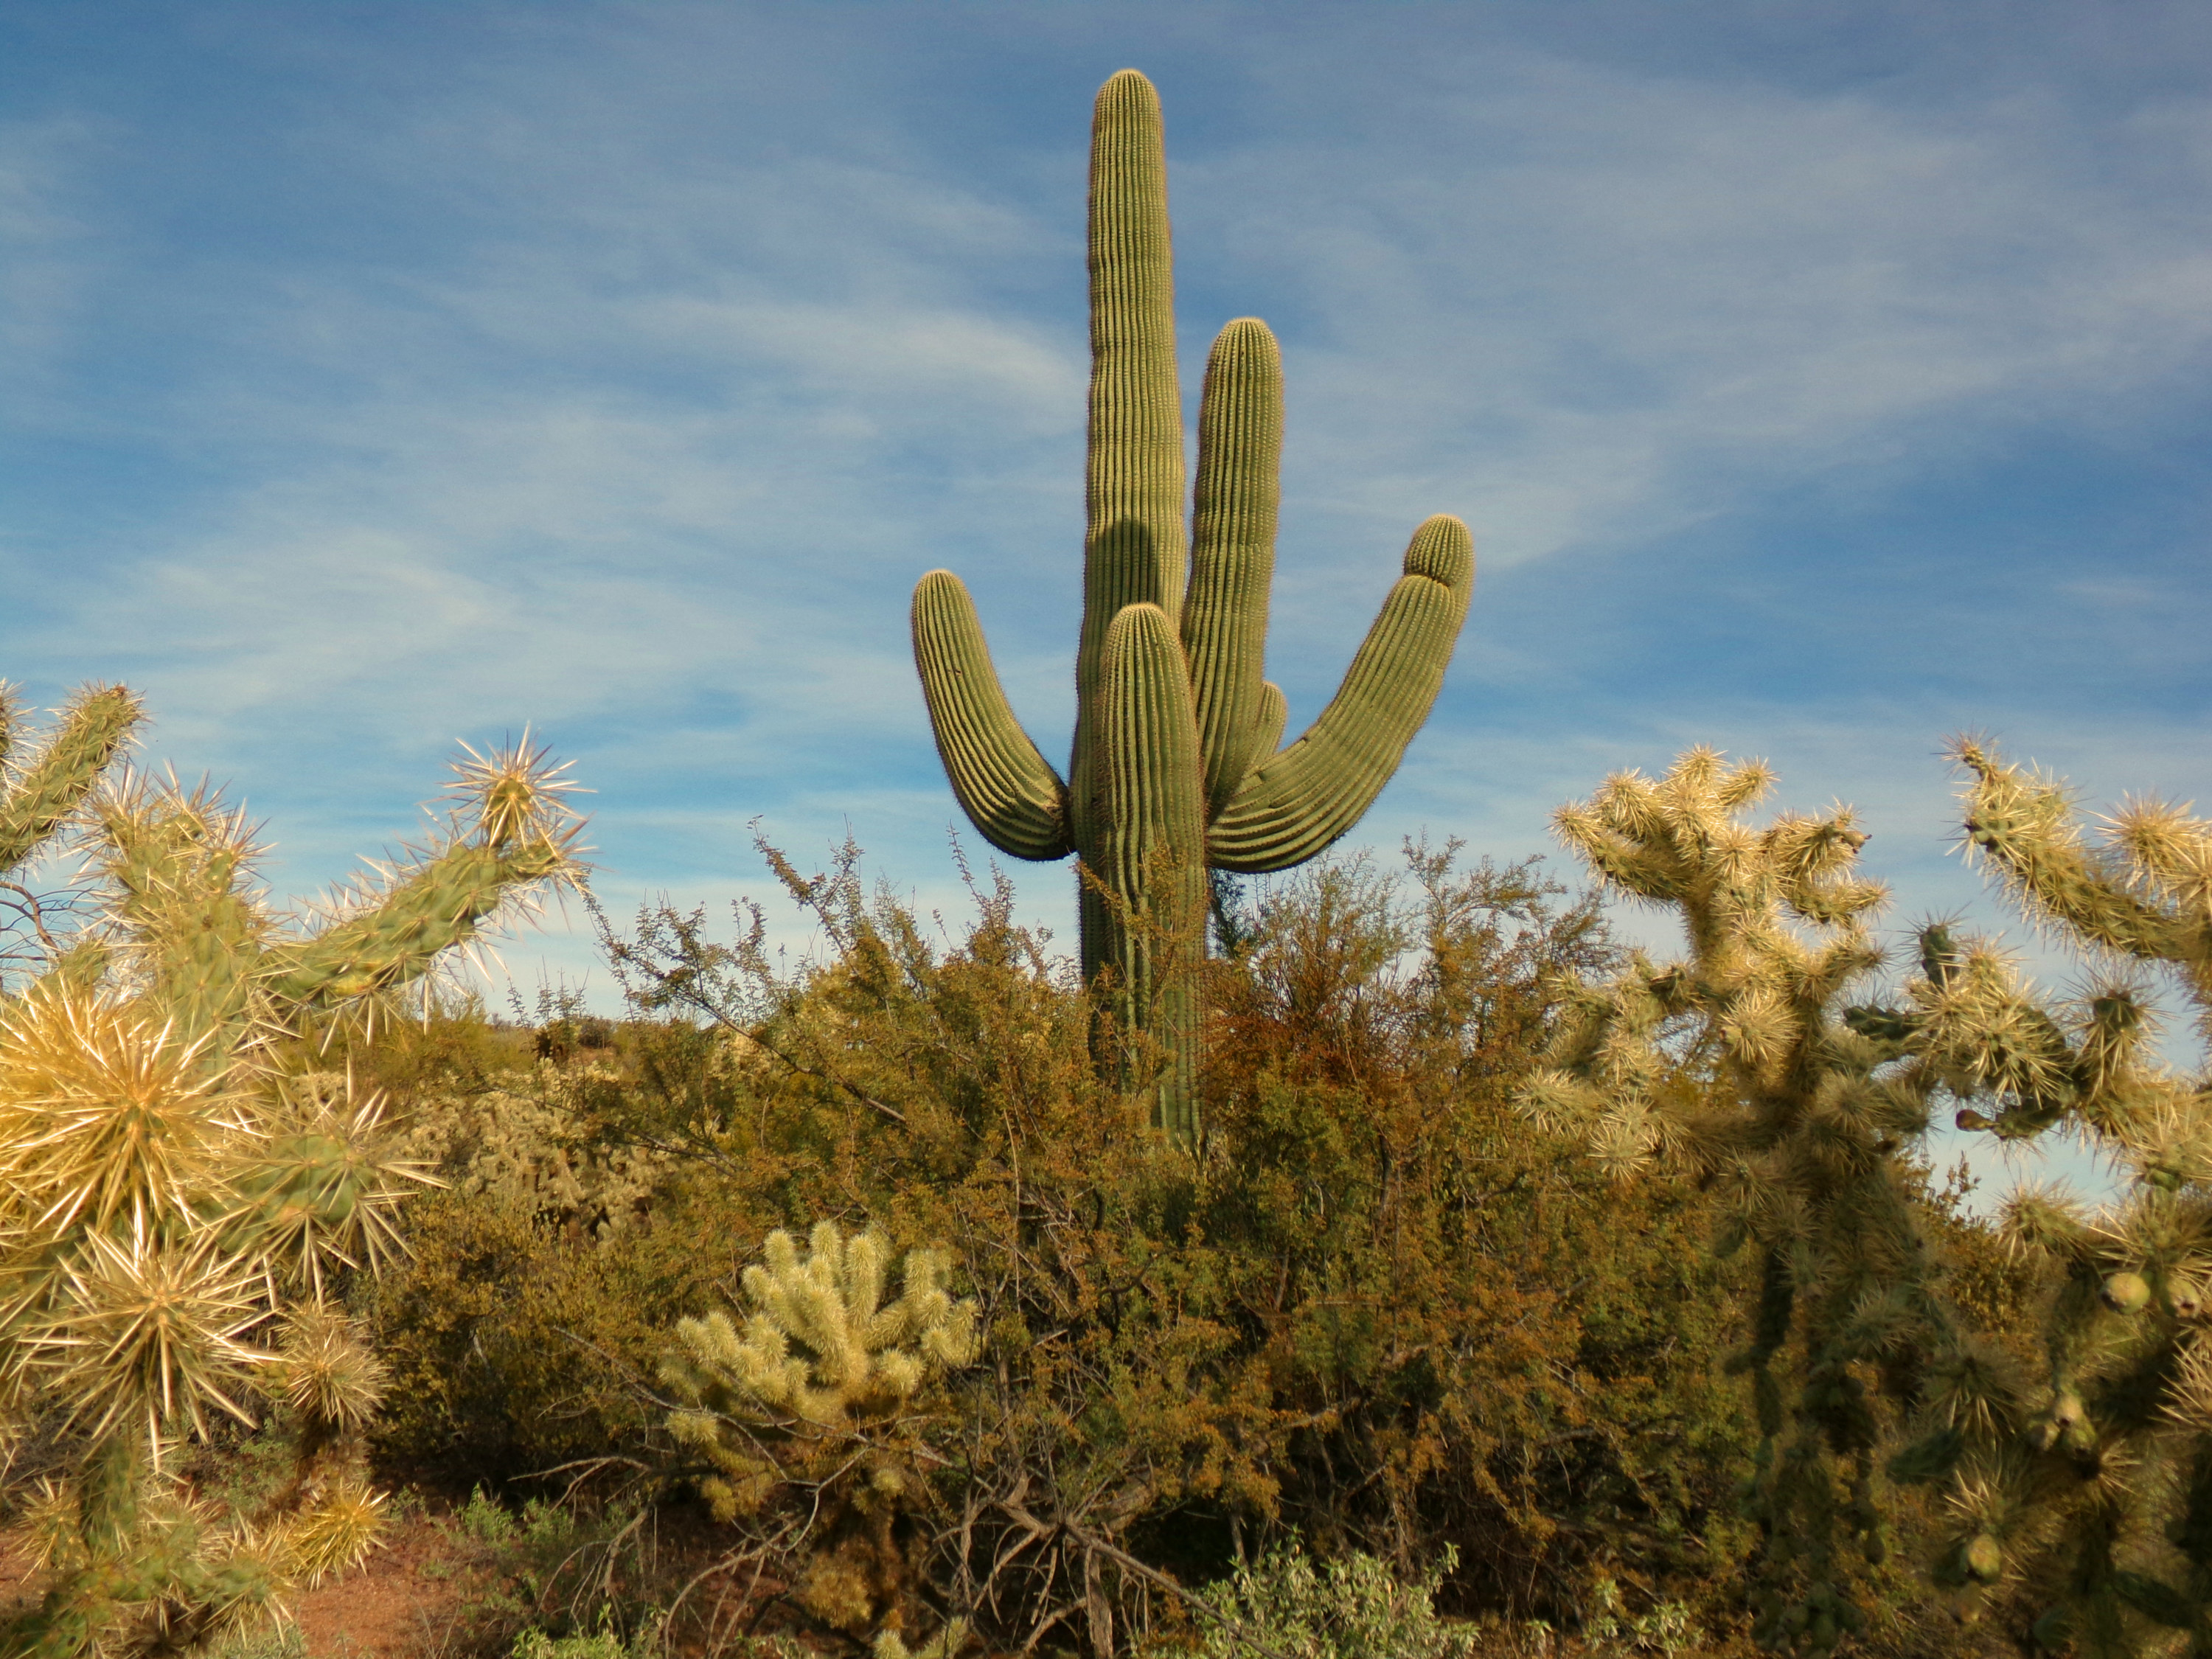 A lone cactus rises up among other desert plants on a sunny Arizona day